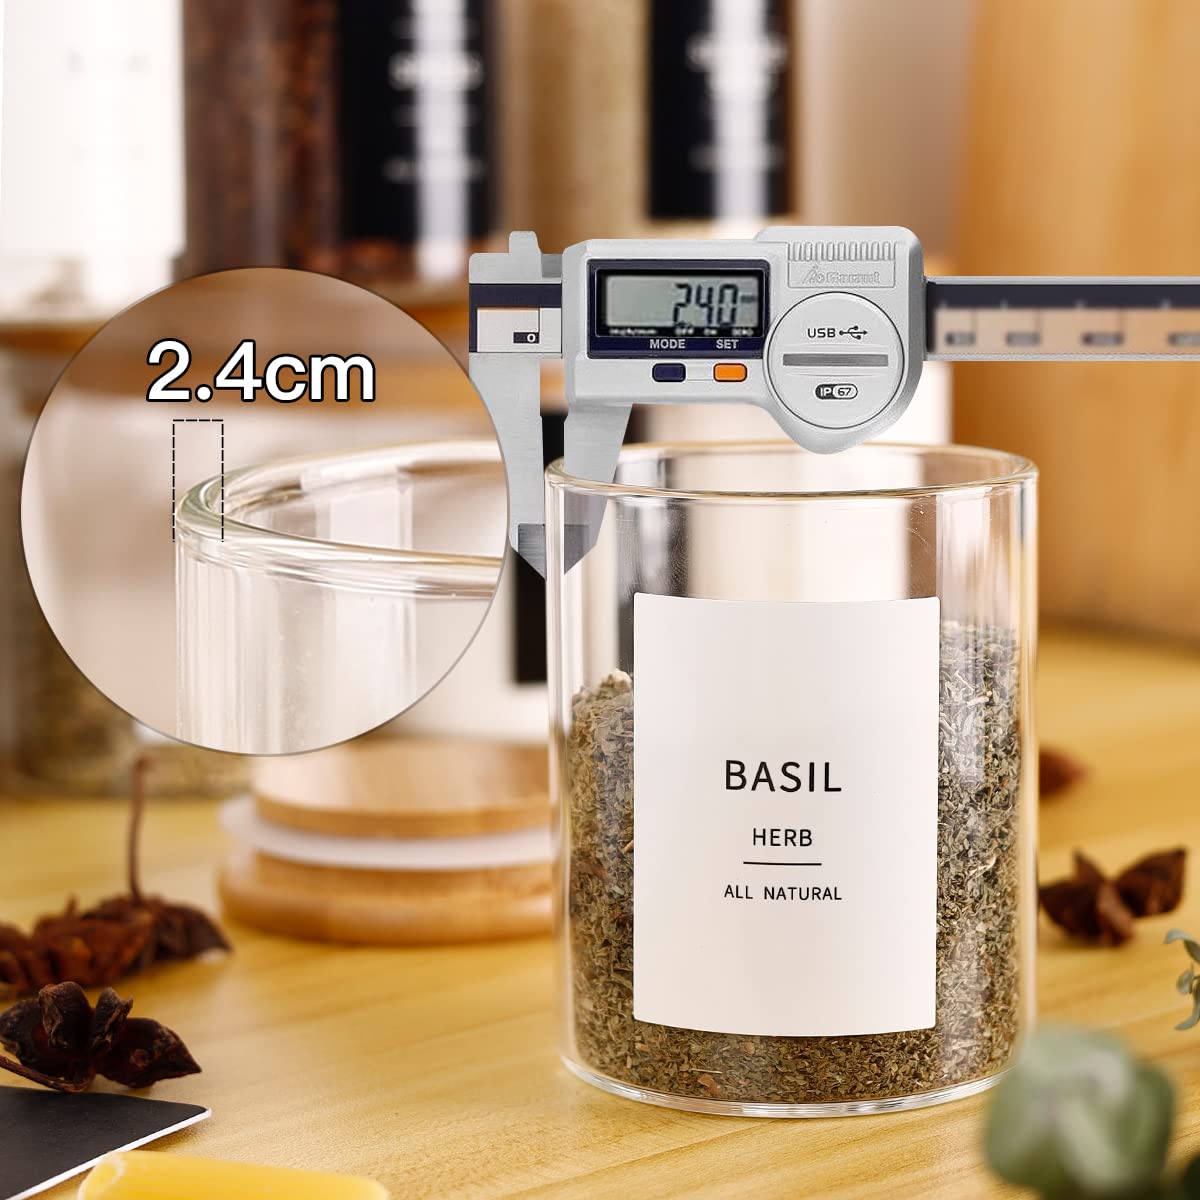 CZZGSM 12 Pcs Glass Spice Jars With 296 Spice Labels Preprinted of White and Black Color- 6oz Thicken(2.4mm) Spice Containers With Bamboo Airtight Lids - Empty Small Herb Seasoning Jars